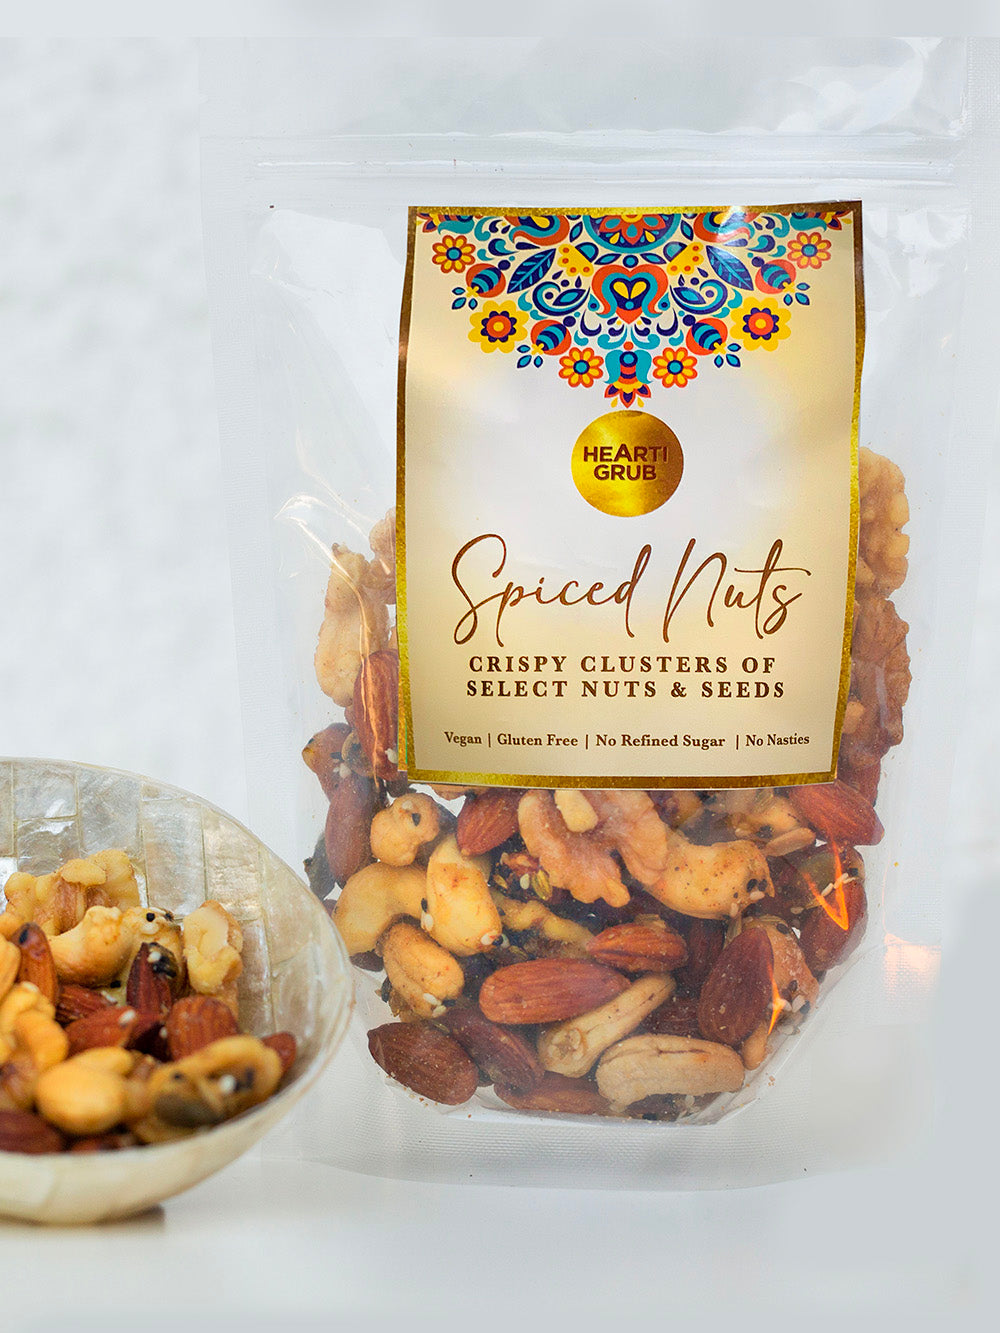 SPICED NUTS. DIWALI. GIFT. GIFTING. CORPORATE GIFTING. DUBAI. PREMIUM NUT MIX. VEGAN NUT MIX. HEARTIGRUB. Deliver gifts in UAE.